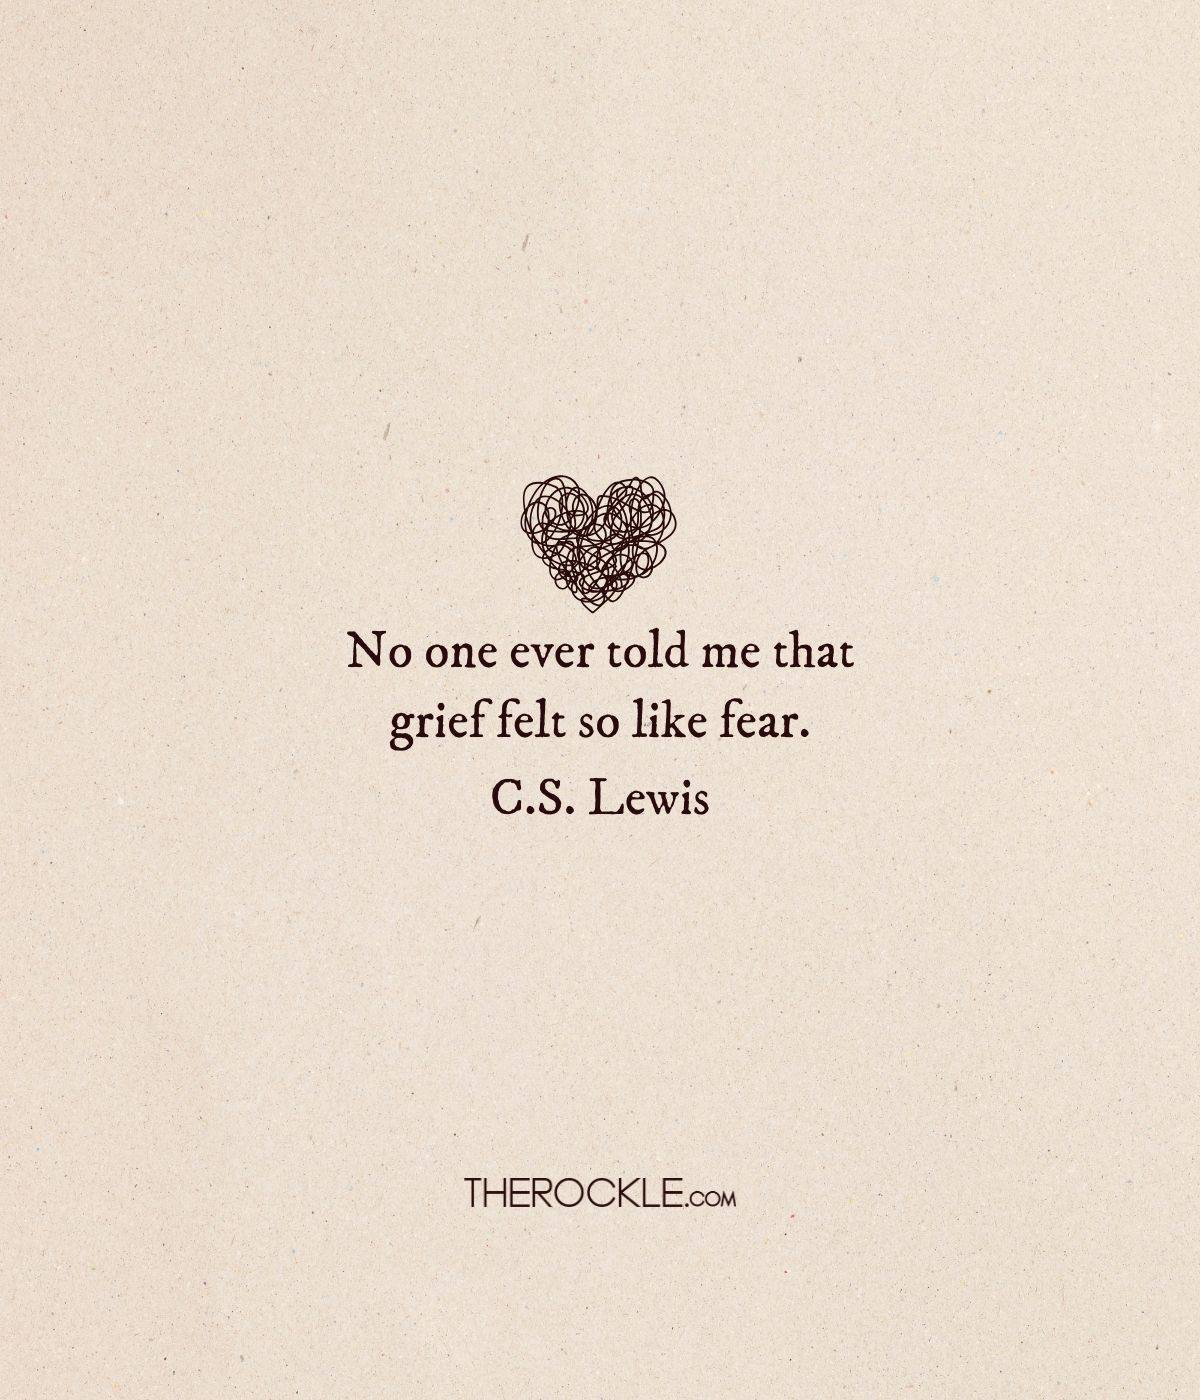 C.S. Lewis quote about grief